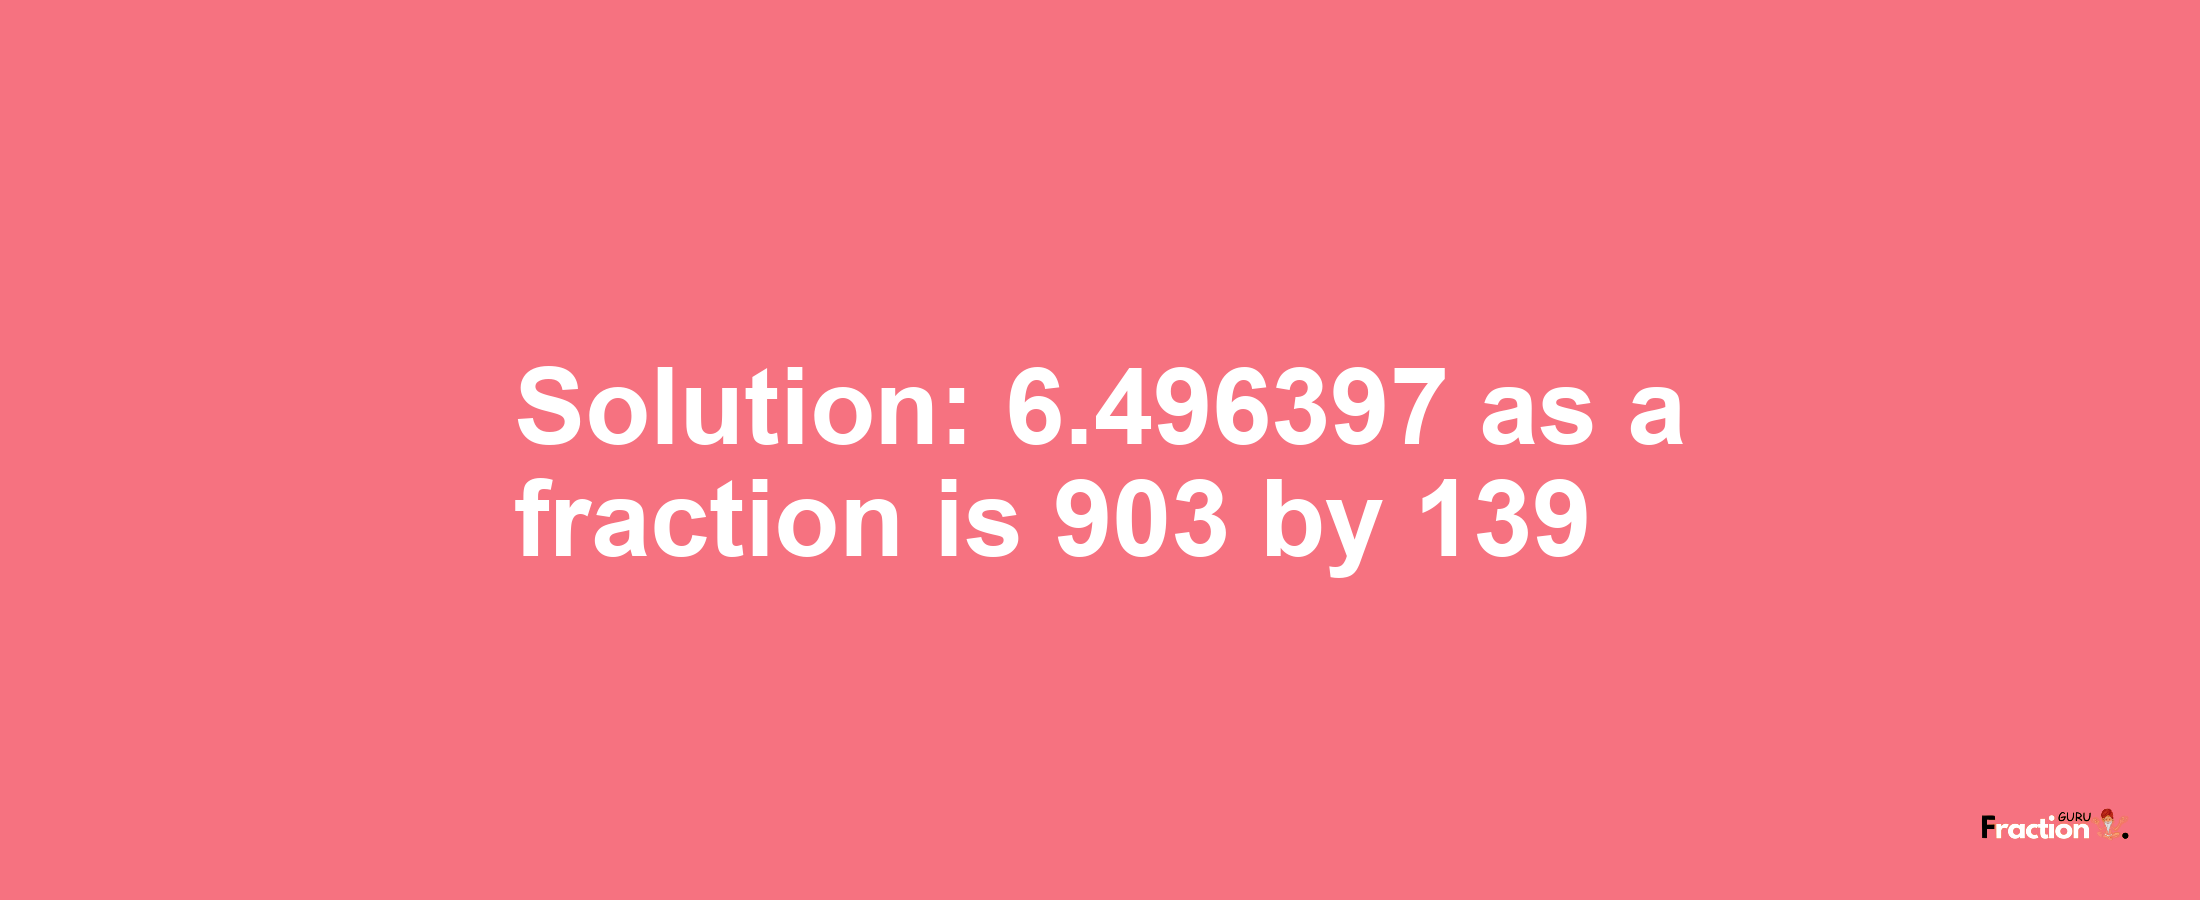 Solution:6.496397 as a fraction is 903/139